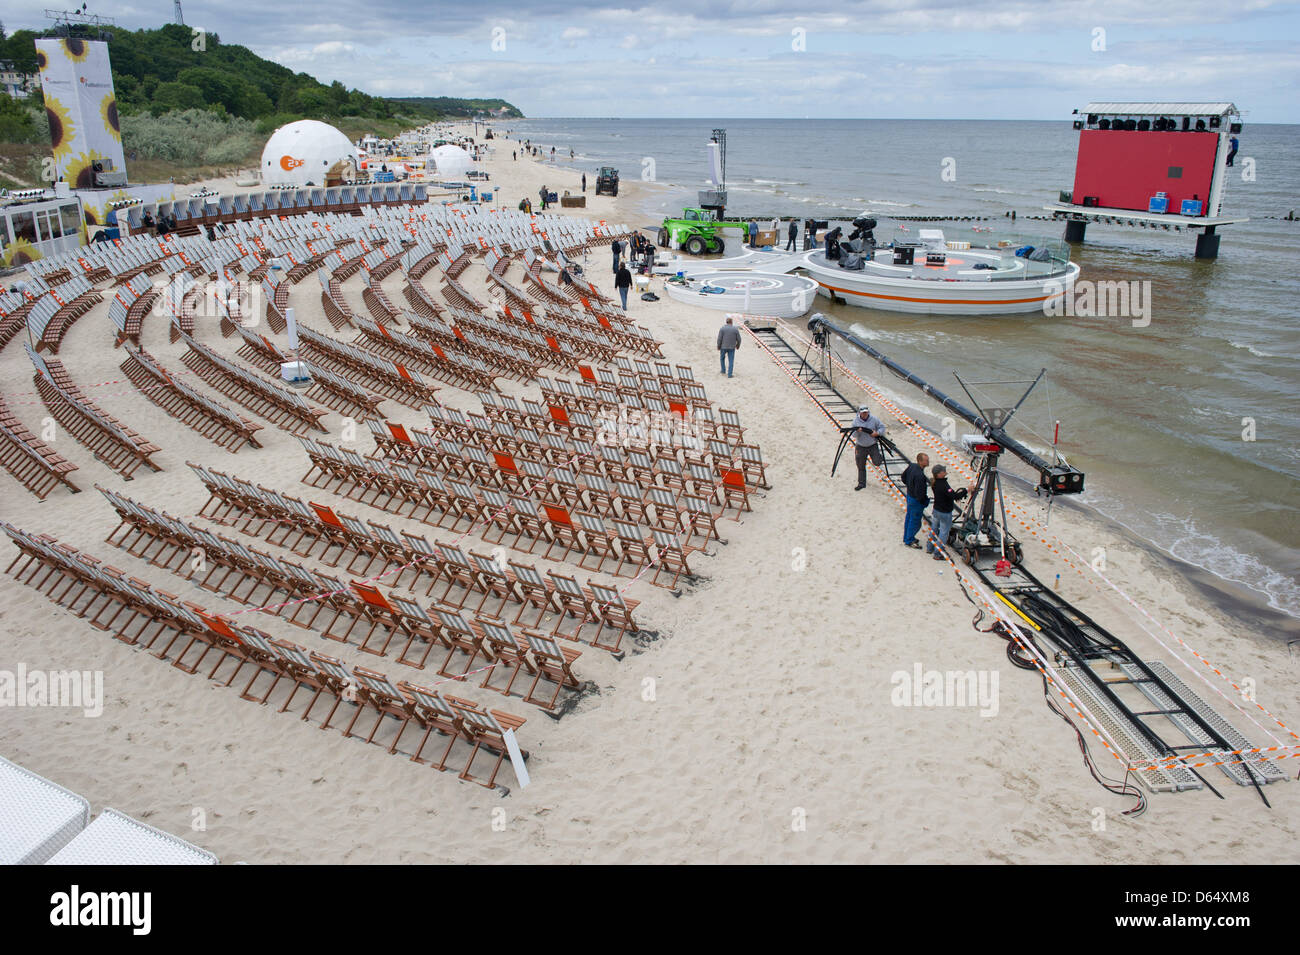 Technicians set up the ZDF sports studio for the live coverage of the UEFA Euro 2012 in Poland and Ukraine at the beach in Heringsdorf, Germany, 05 June 2012. The private beach can only be accessed with a ticket. TV presenter Mueller-Hohenstein and former national goal keeper Kahn, amongst others, will cover the Euro 2012 from Usedom. Photo: STEFAN SAUER Stock Photo